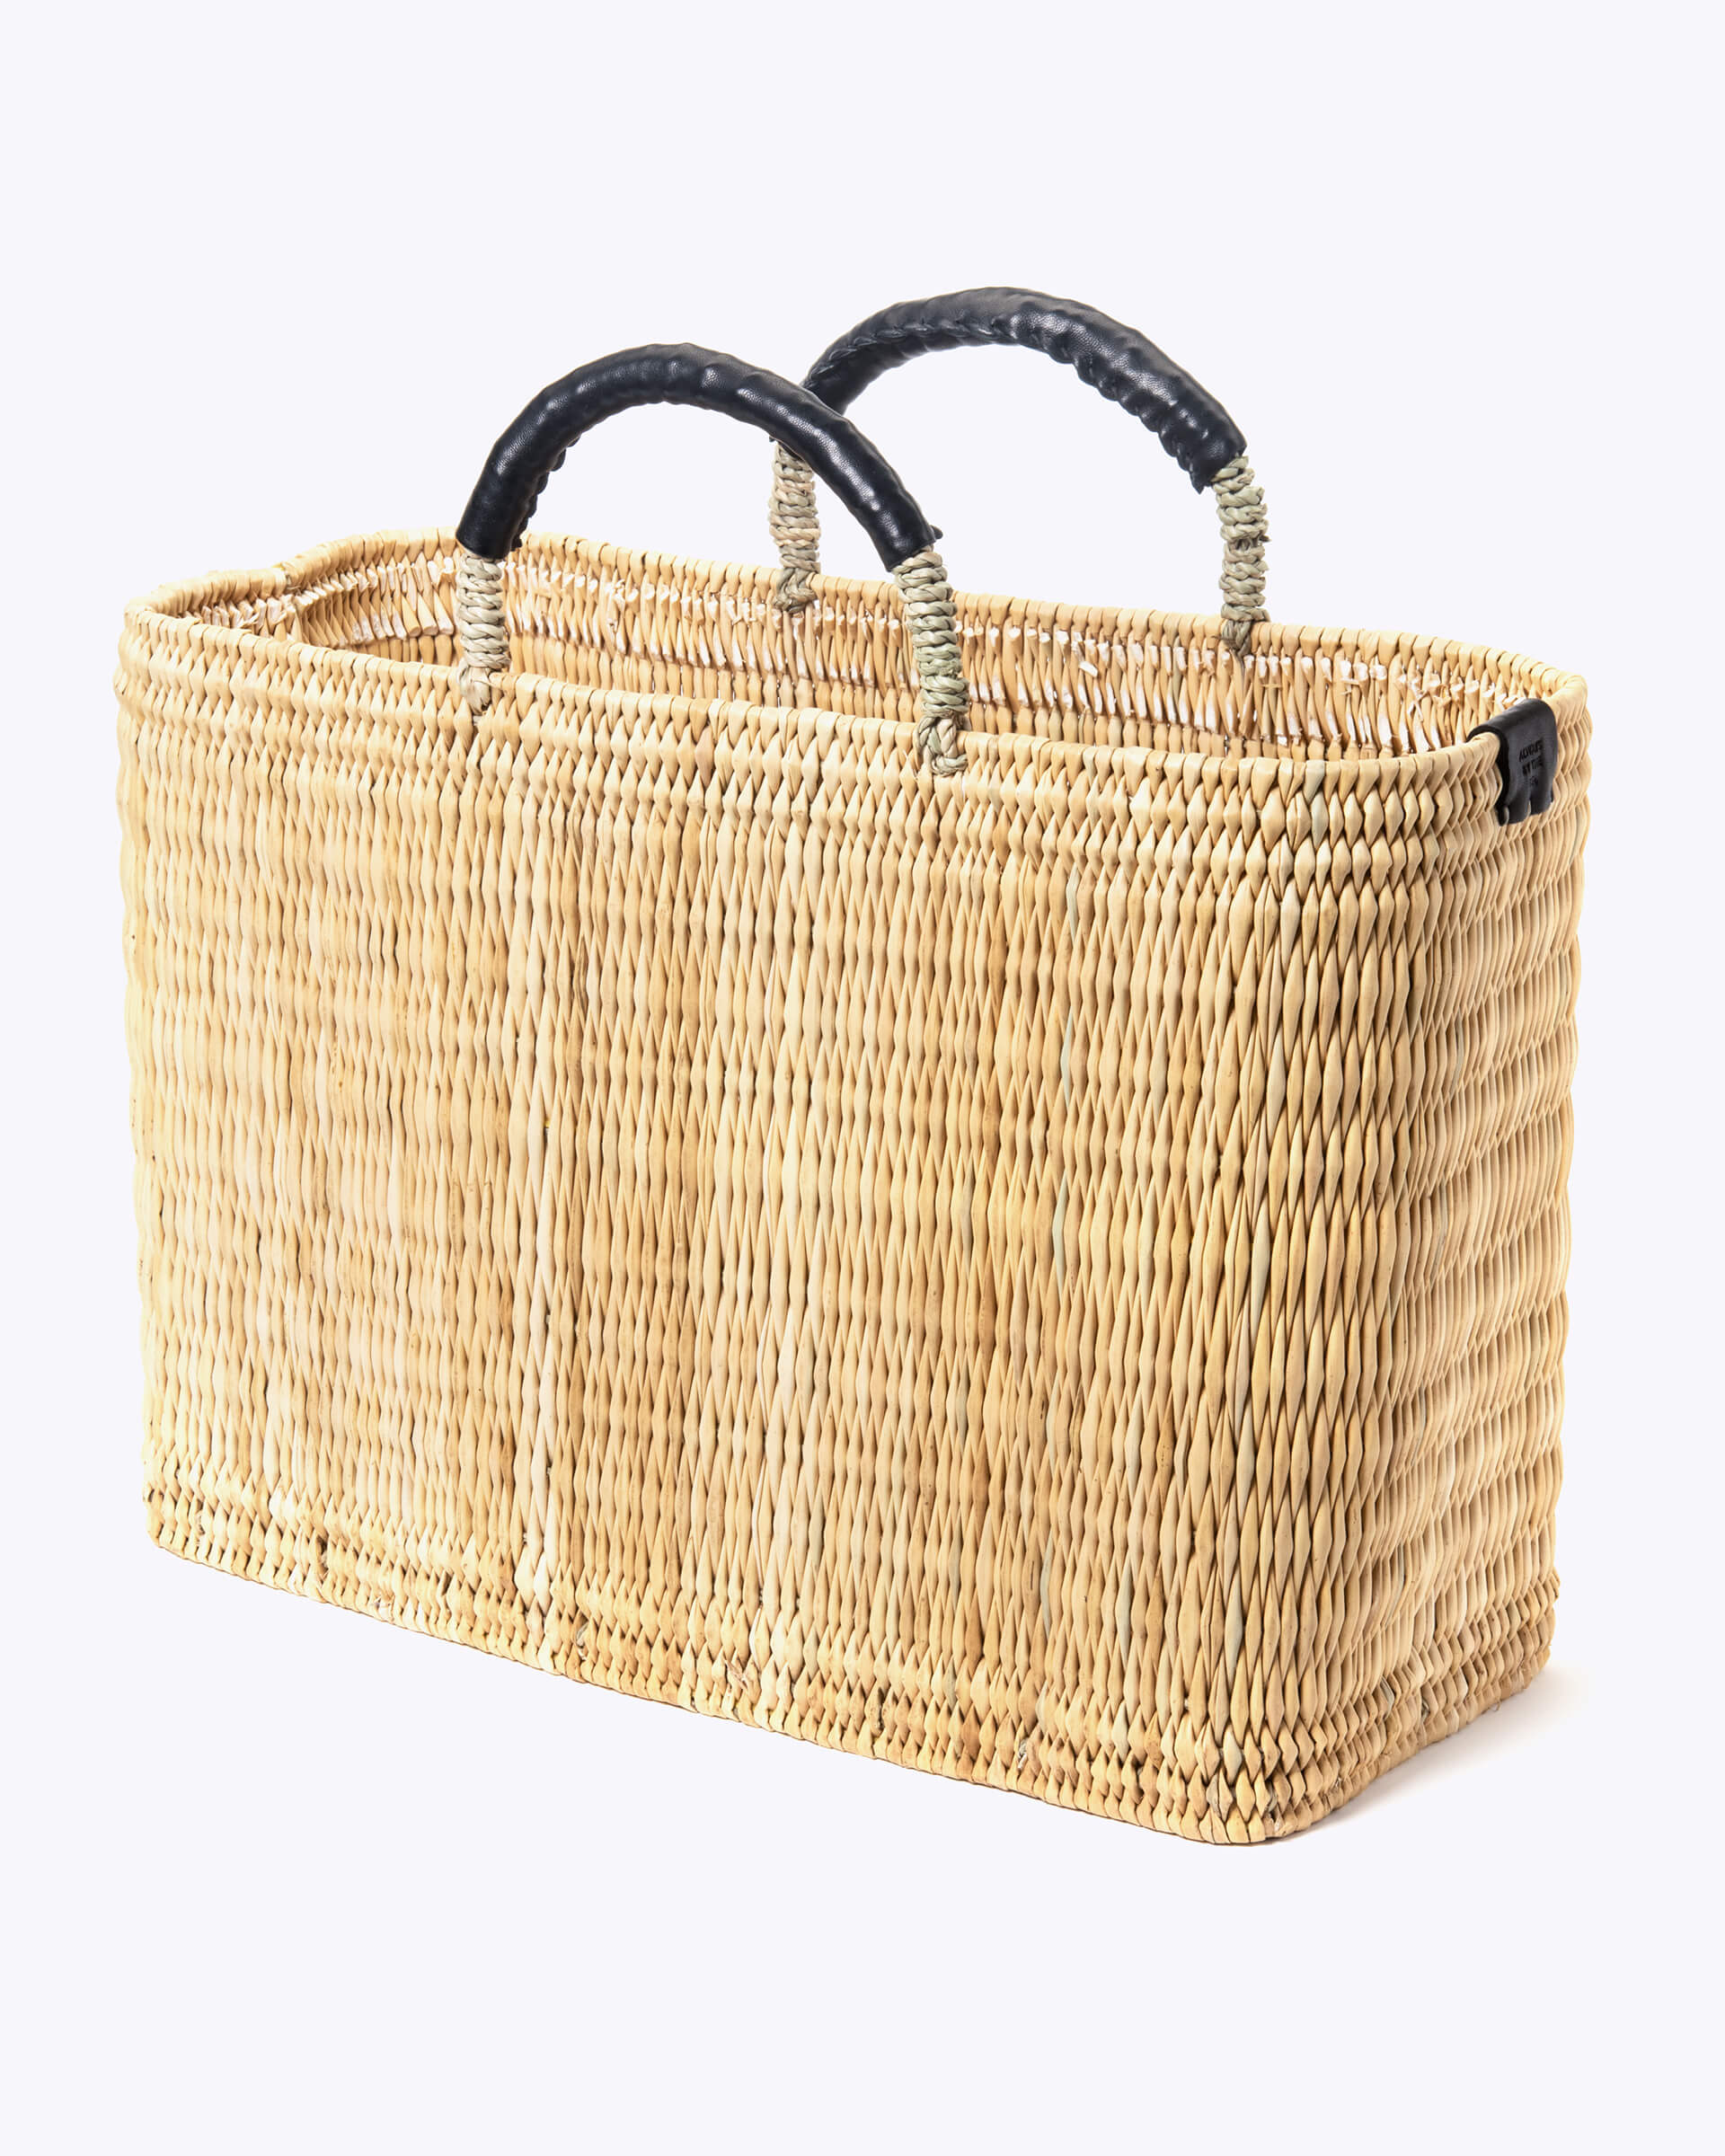 large straw basket wrapped with black leather handle on a white background at an angle